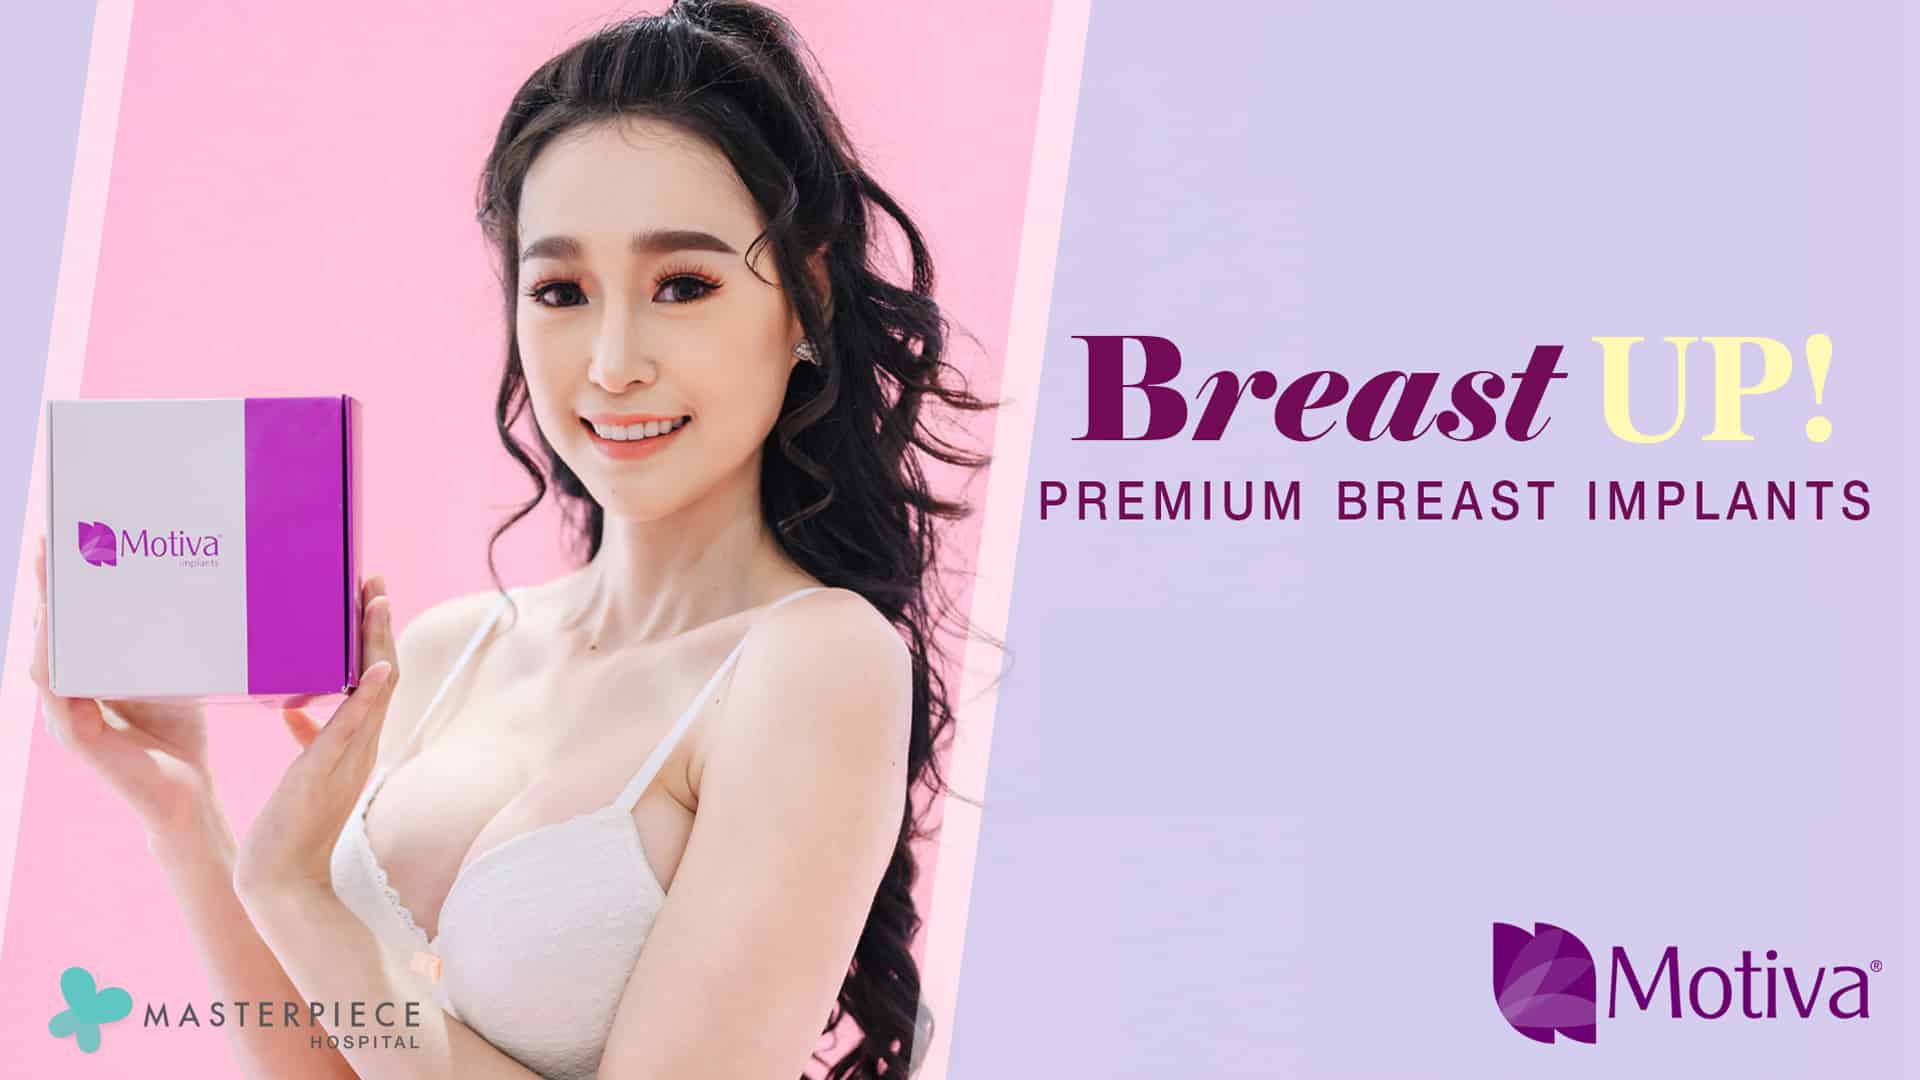 Breast UP